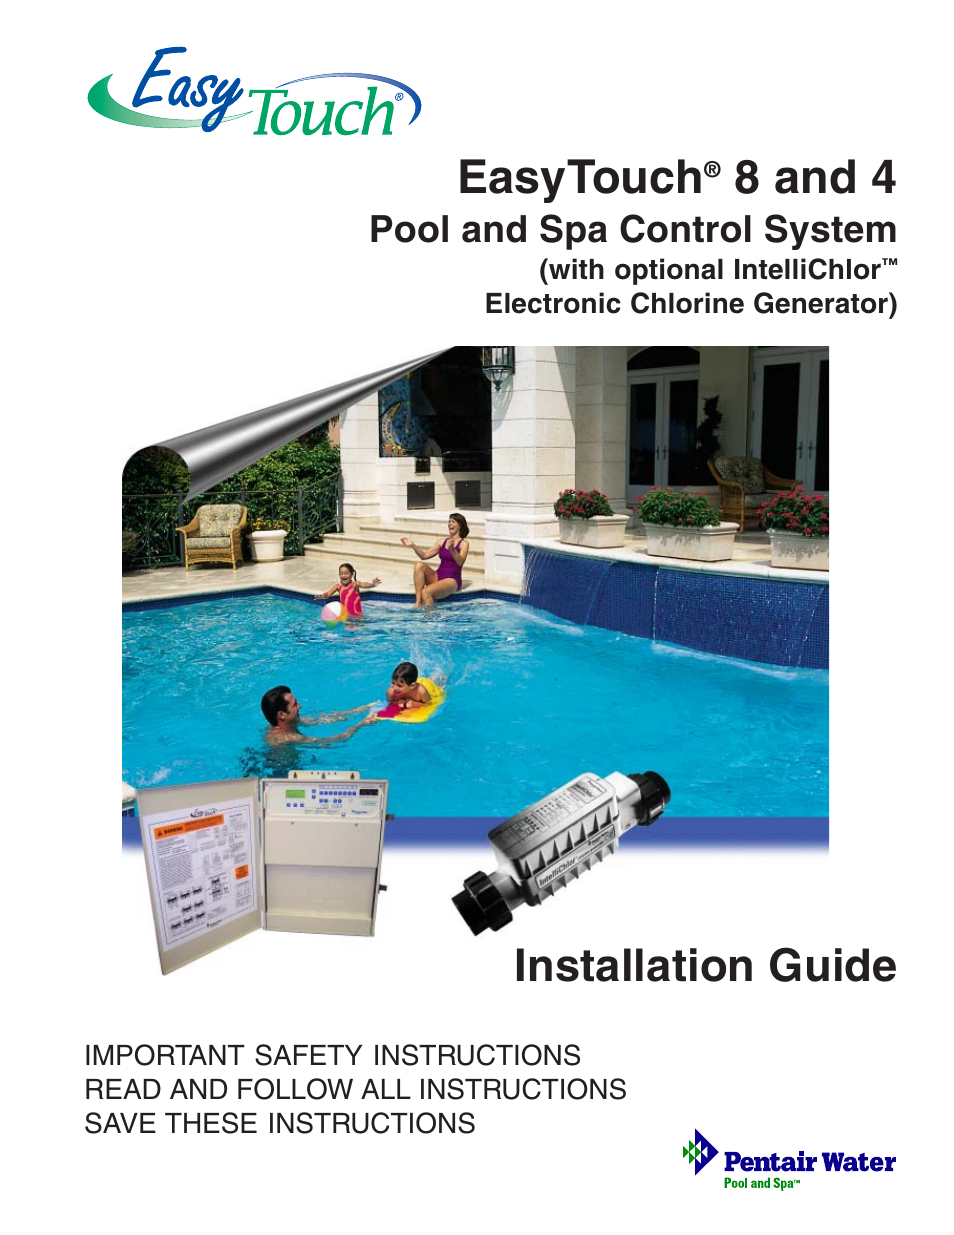 Pentair EasyTouch 8 and 4 Pool and Spa Control System User Manual | 32 pages